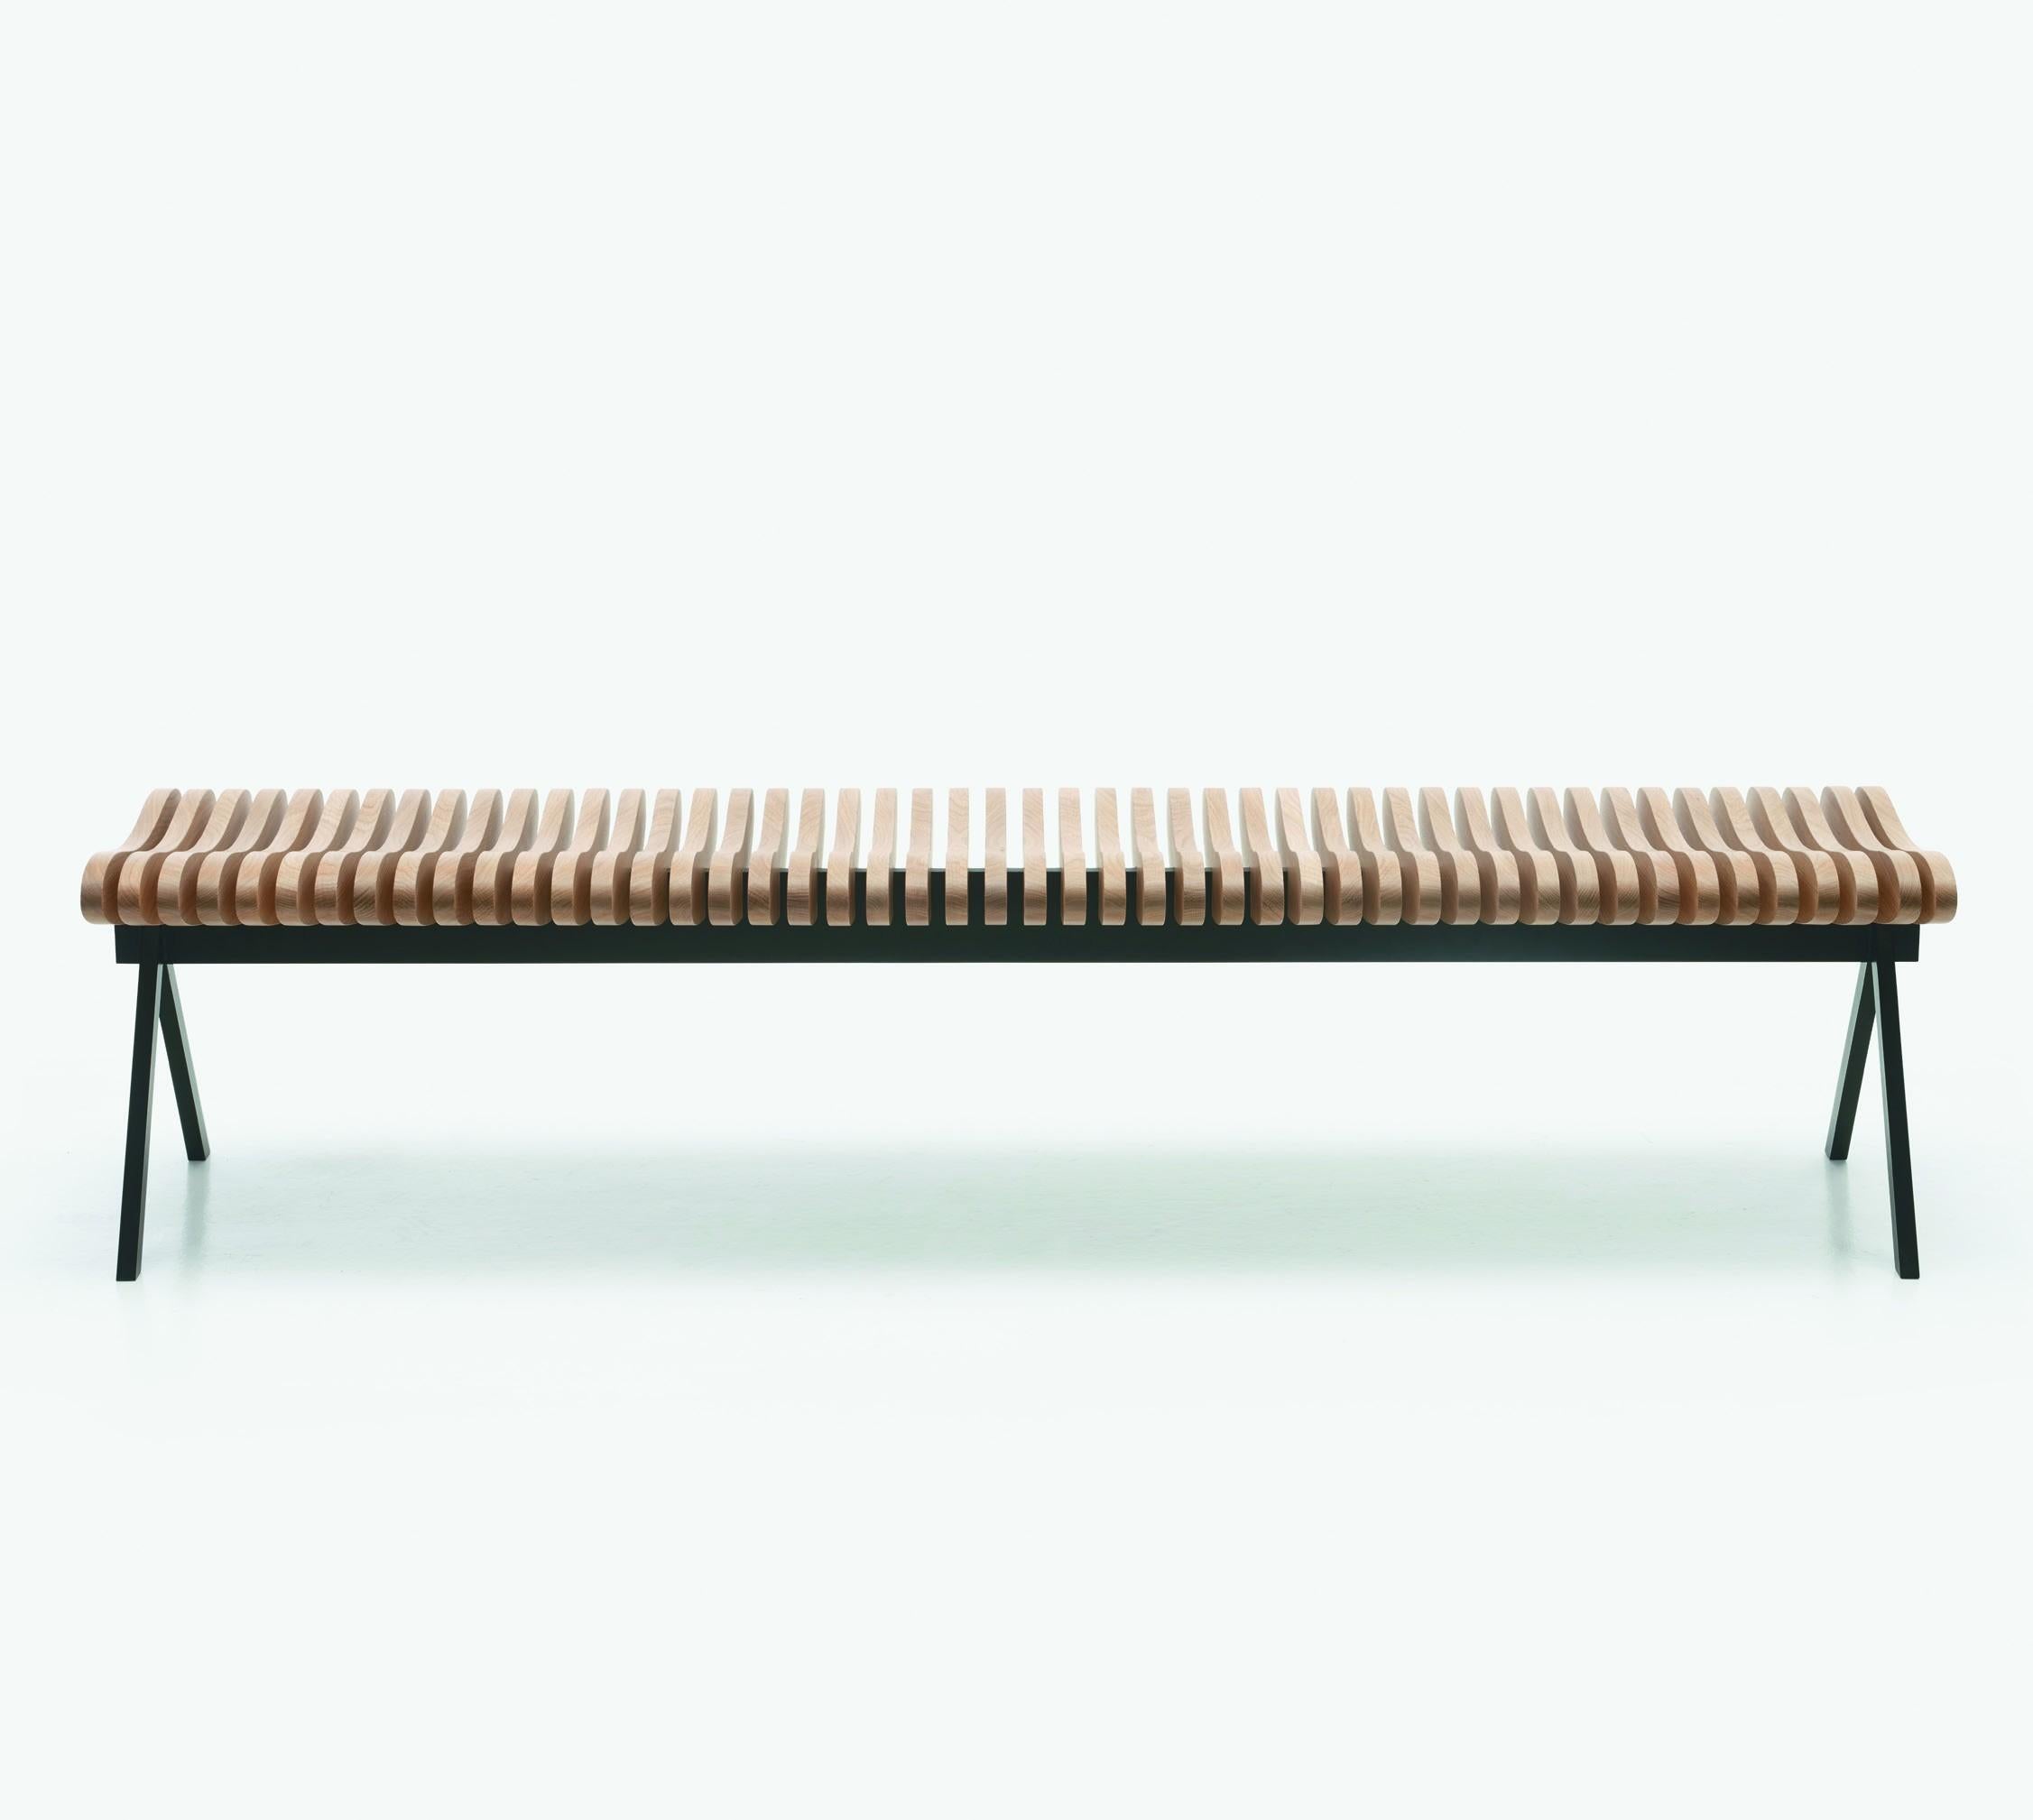 Perlude oak bench medium by Caroline Voet.
Dimensions: 50 x 150 x H 43 cm.
Materials: Natural oak.
Also available in seating oak black, seating walnut natural, seating teak (outdoor).

The Perlude benches are assembled from top grade